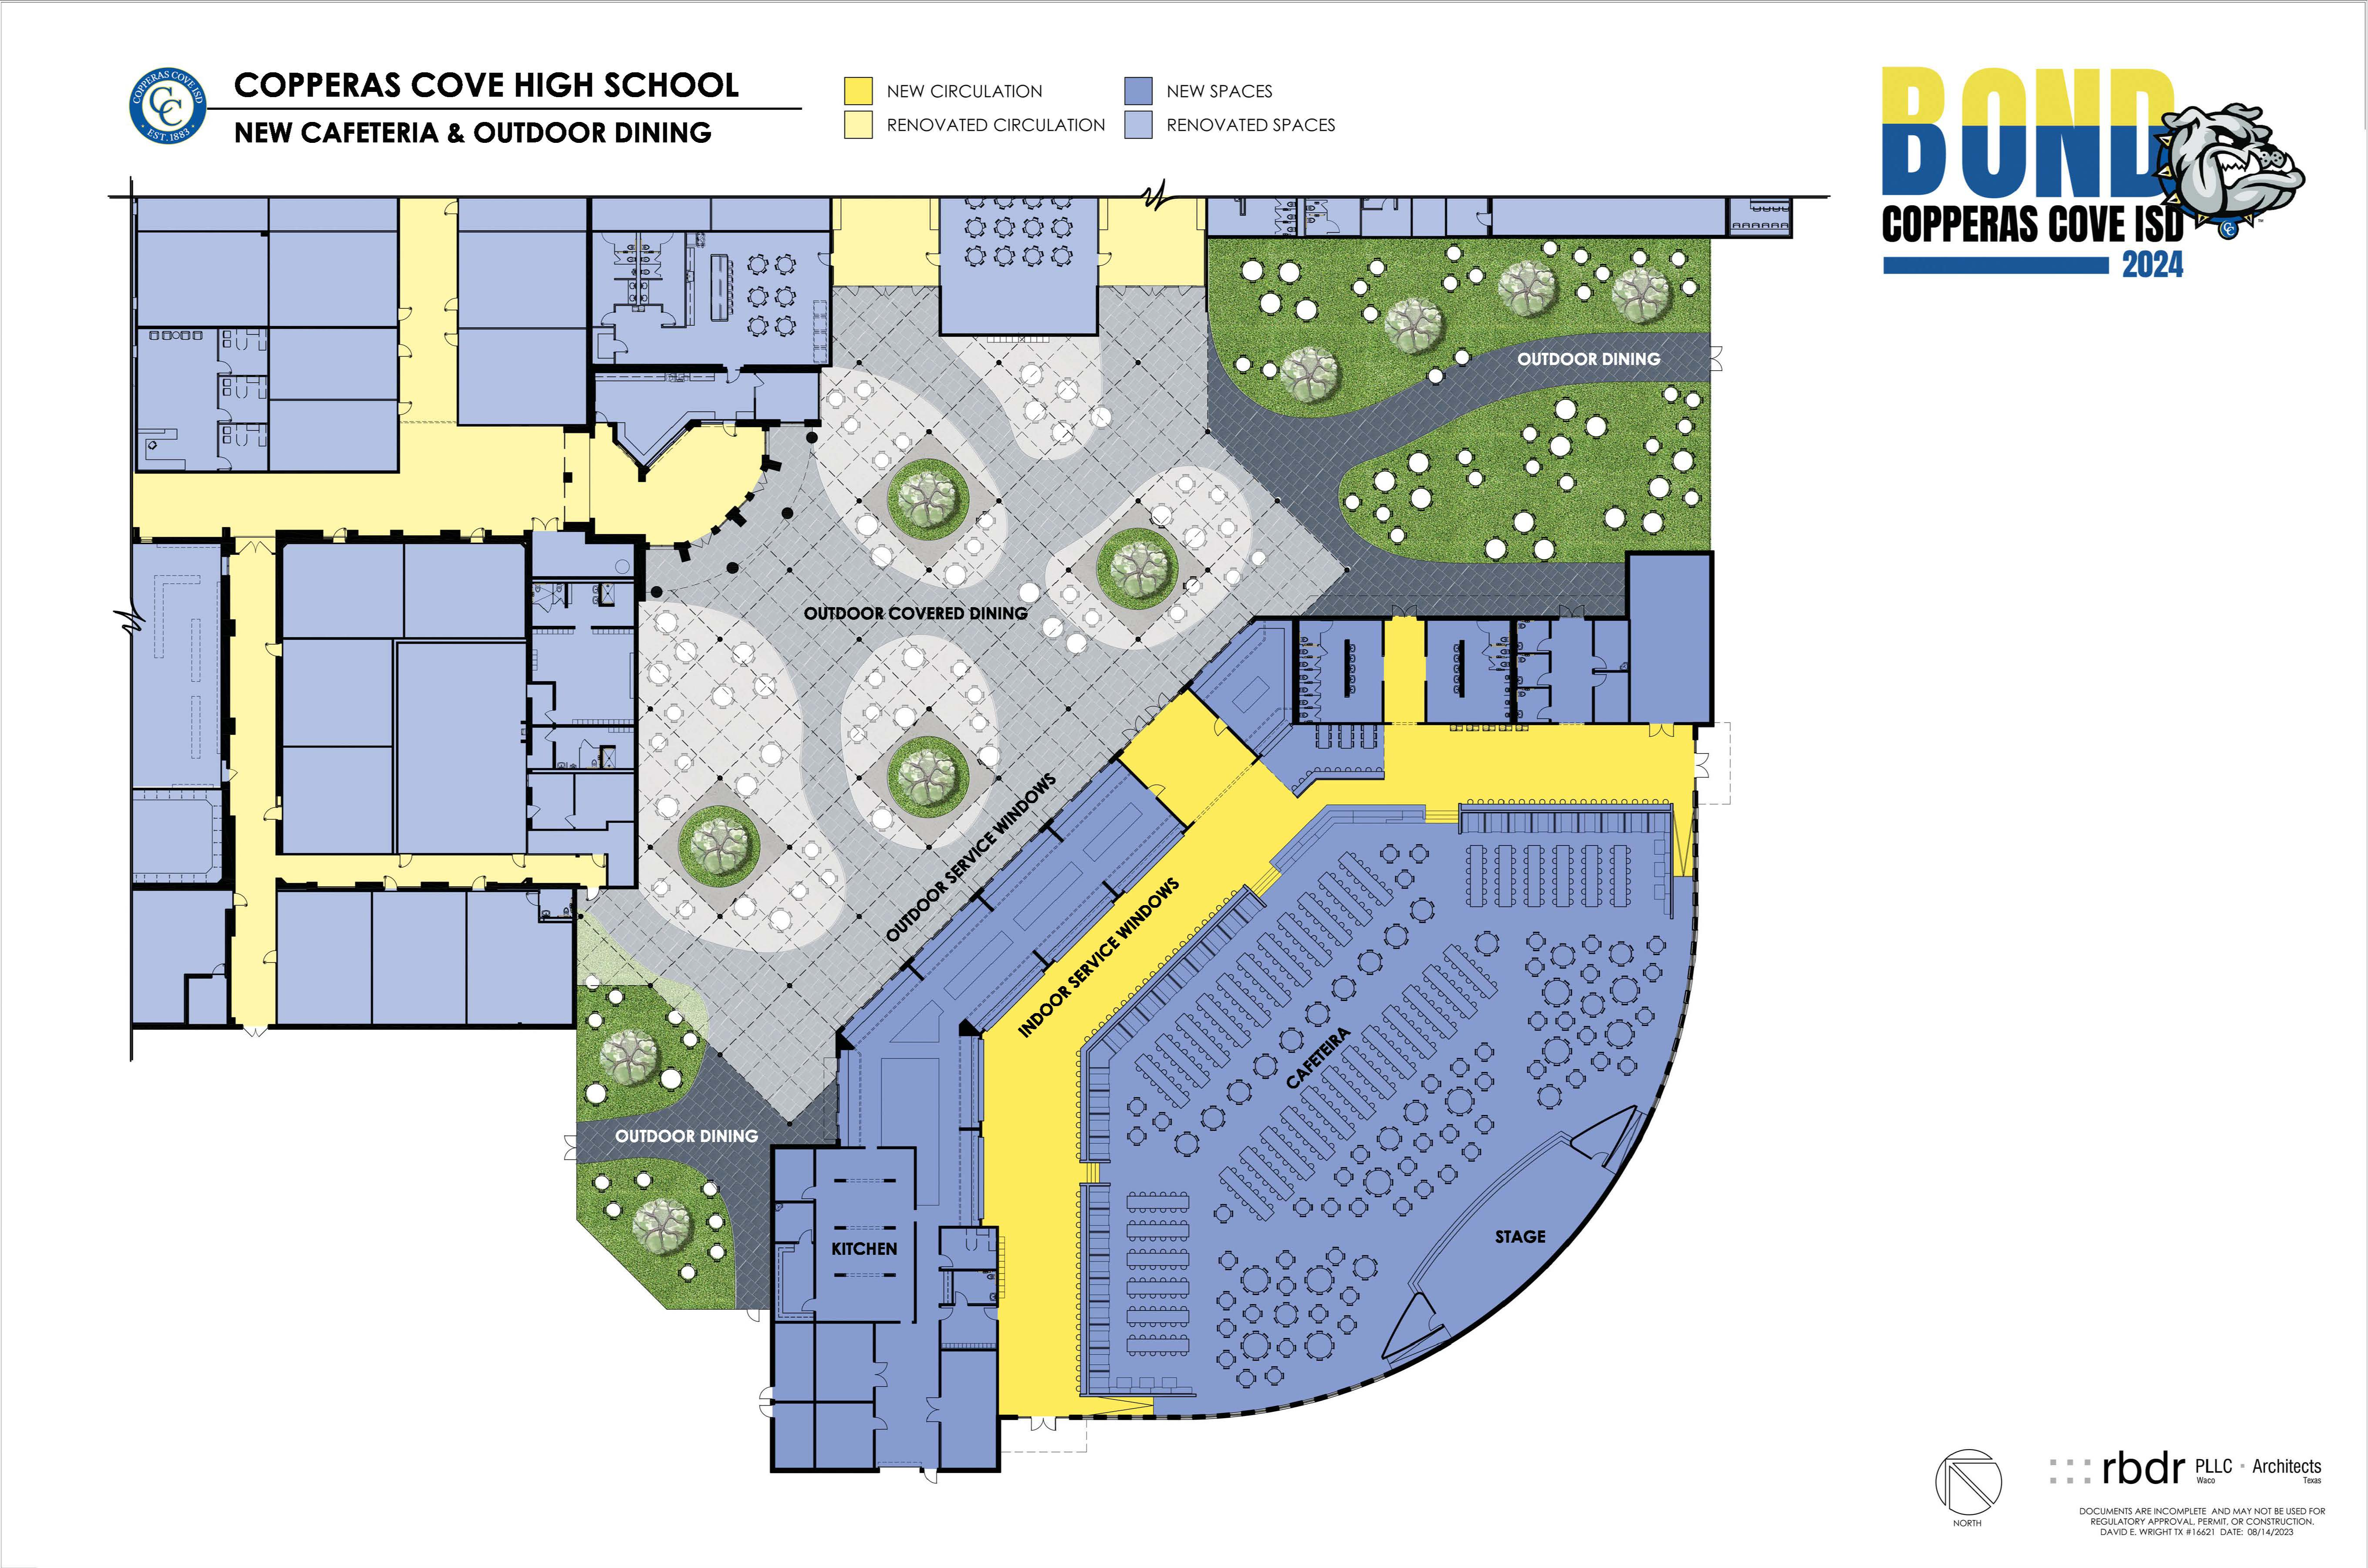 Proposed floor plan for a new cafeteria at Copperas Cove High School. 